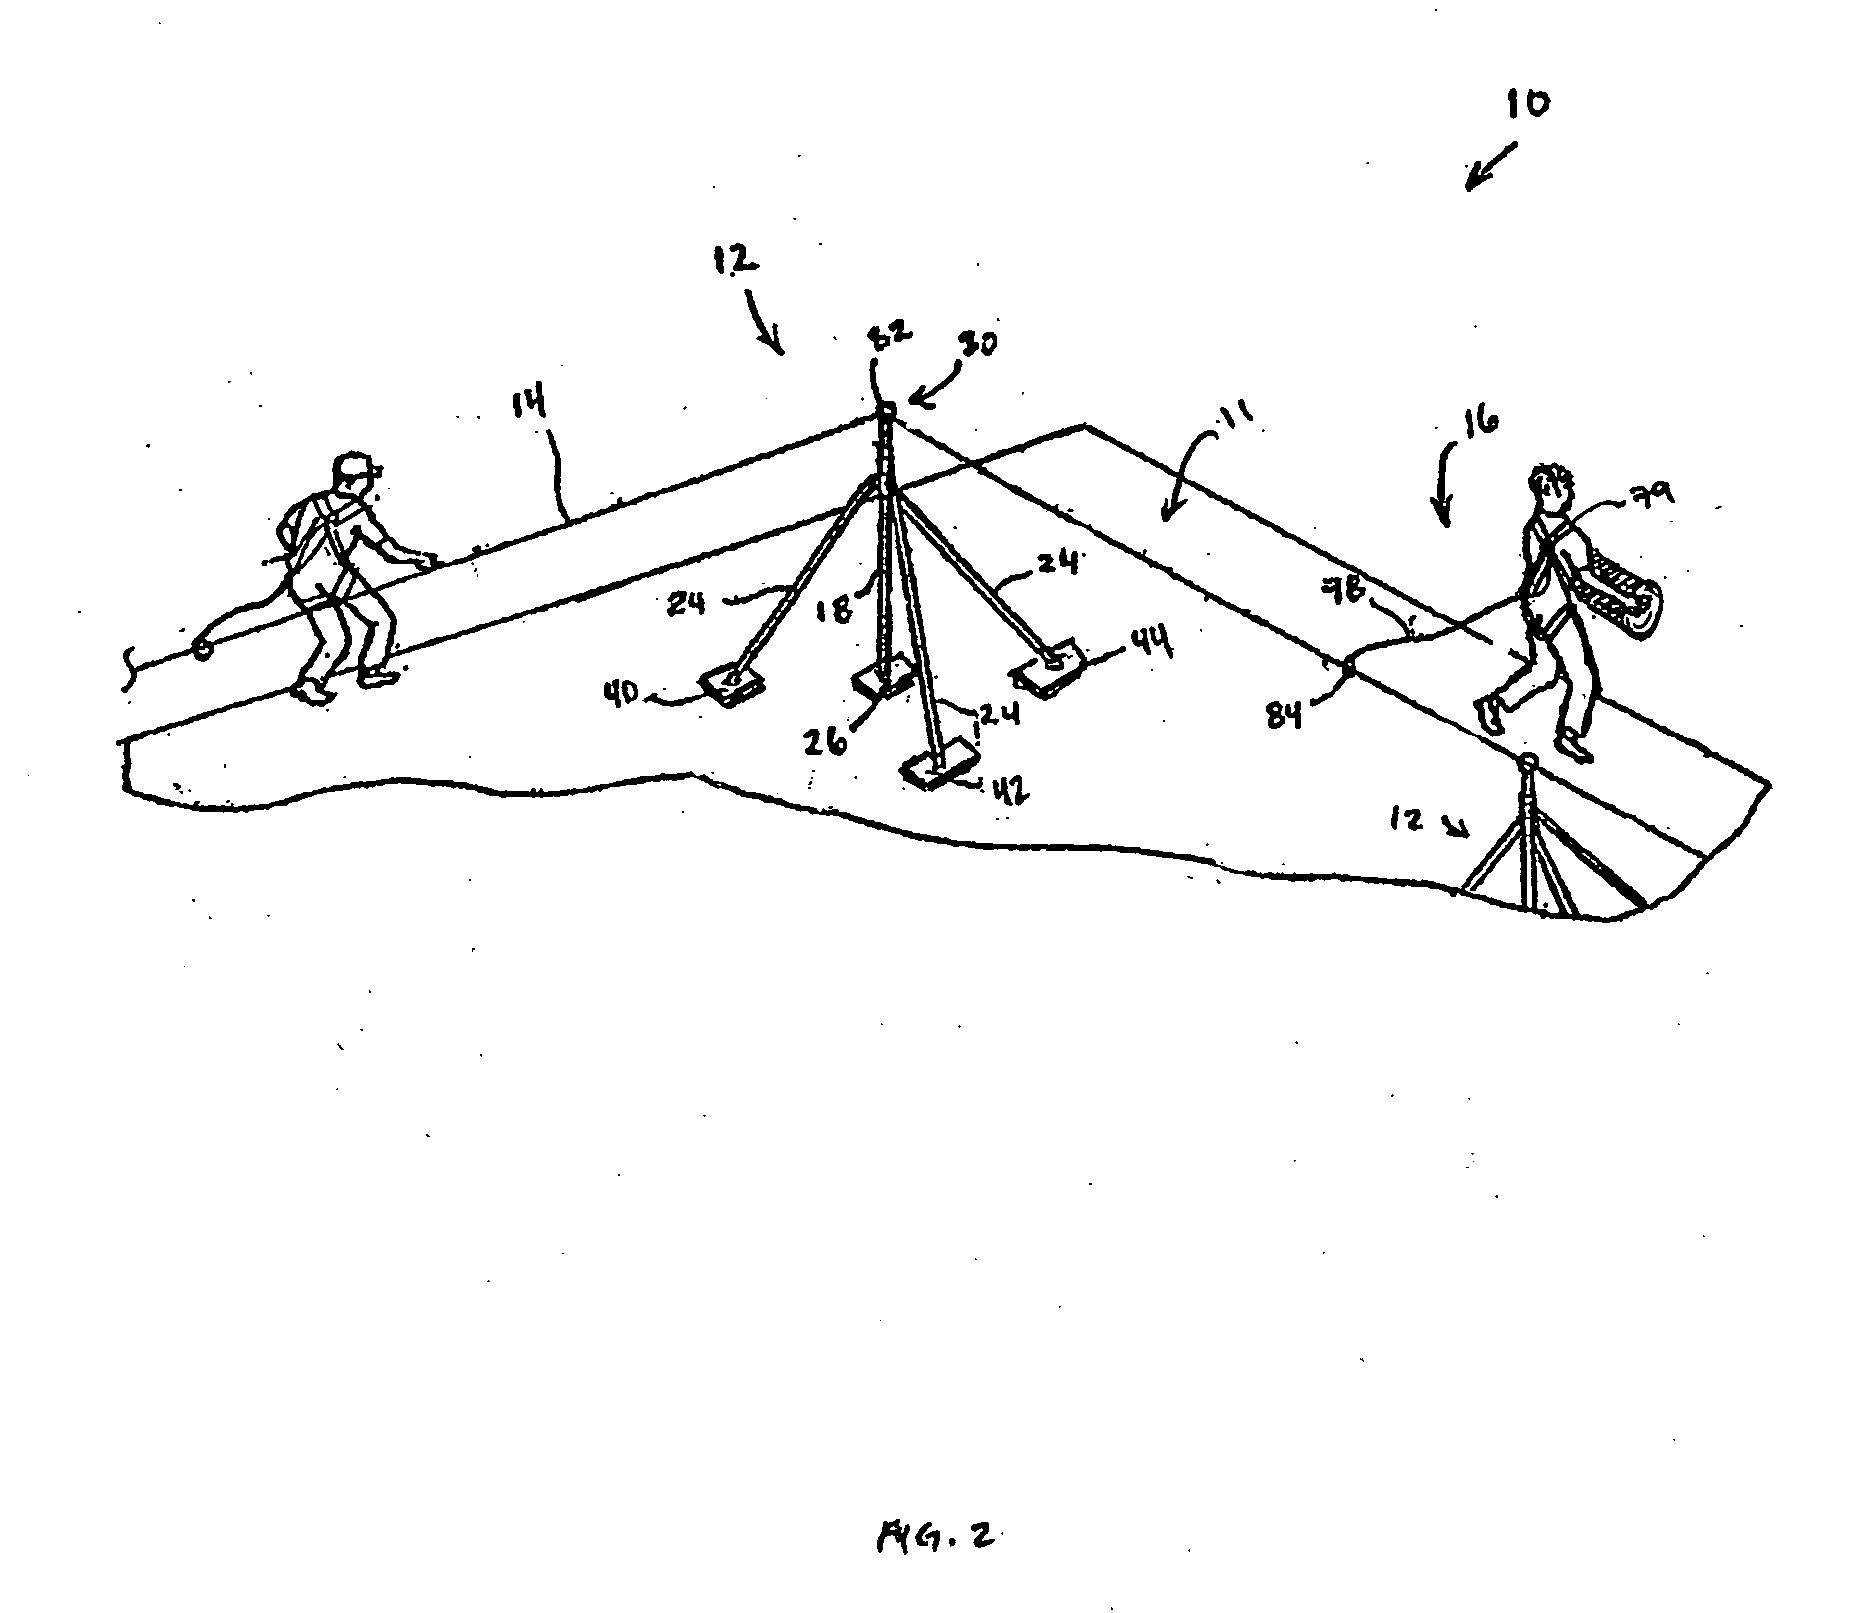 Roofing safety cable system and method